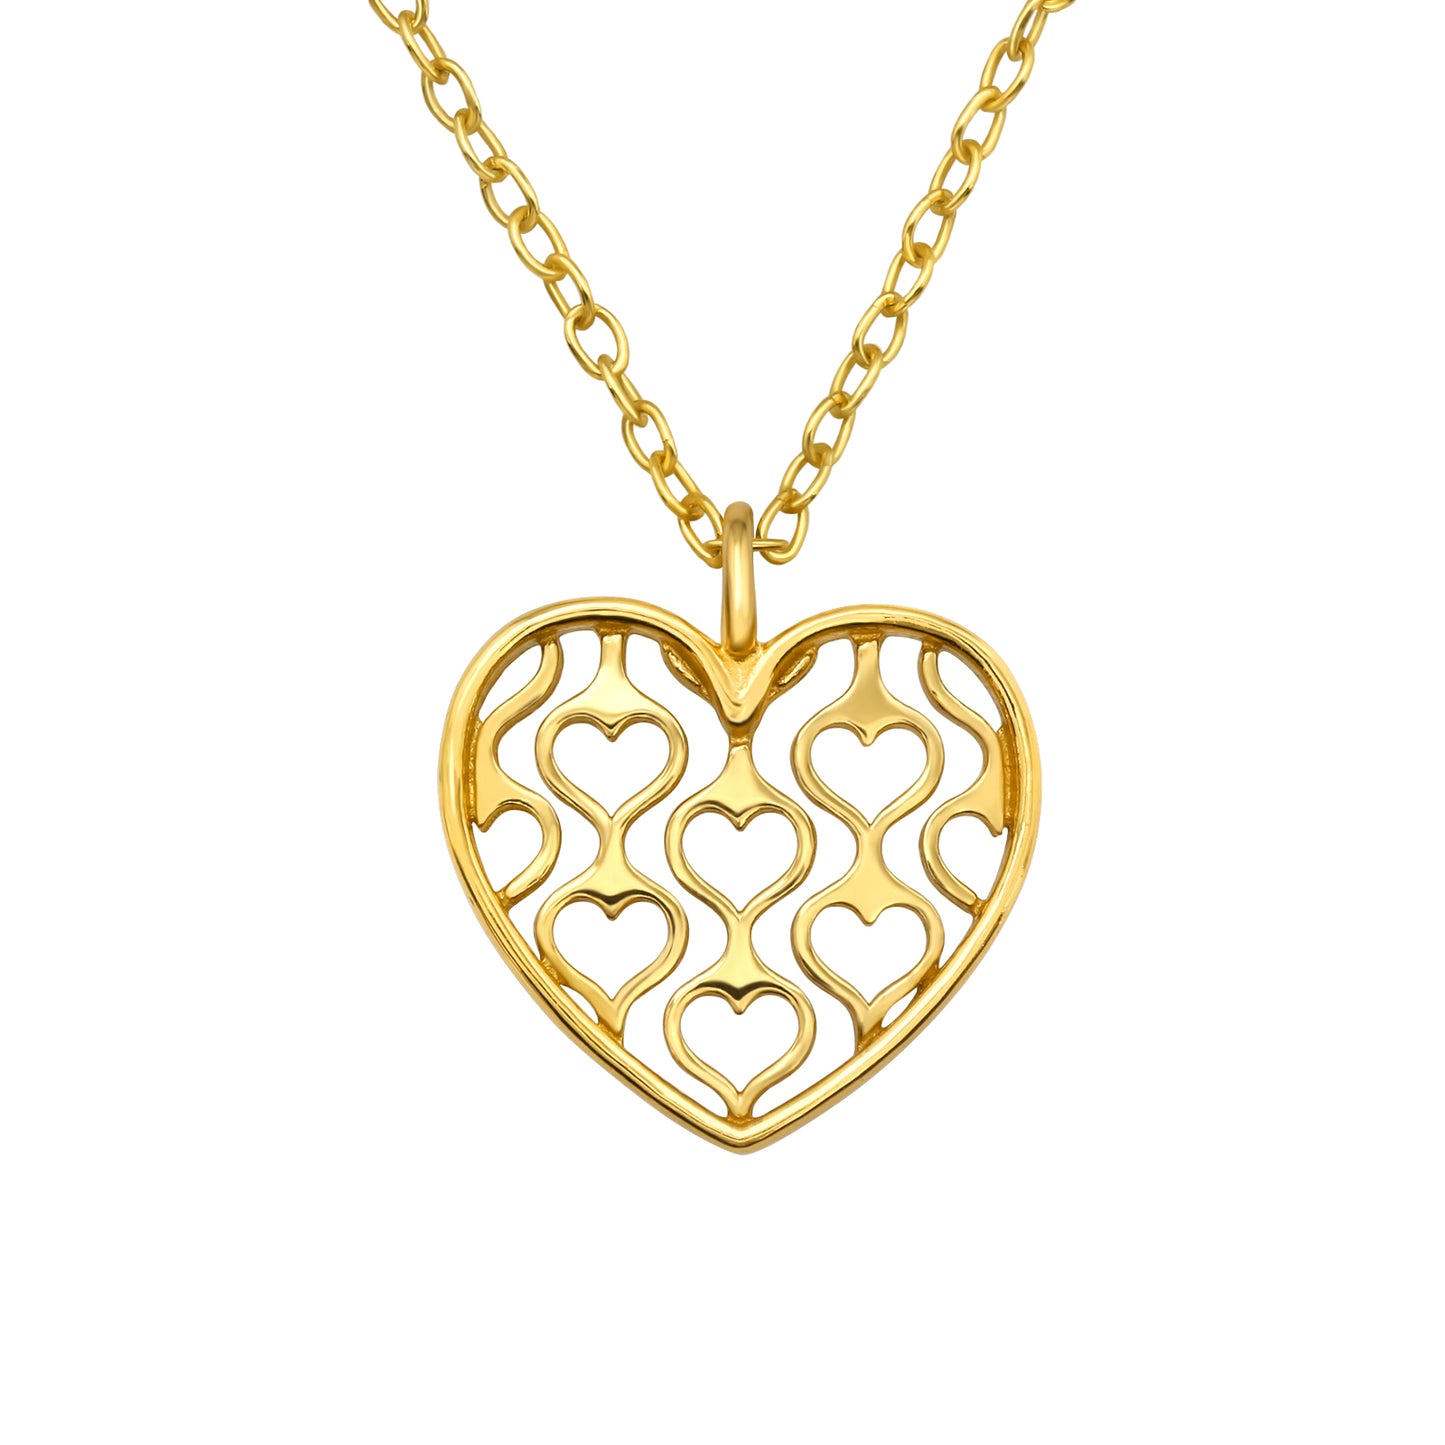 Goldtone Plated Sterling Silver Hearts Pendant Necklace